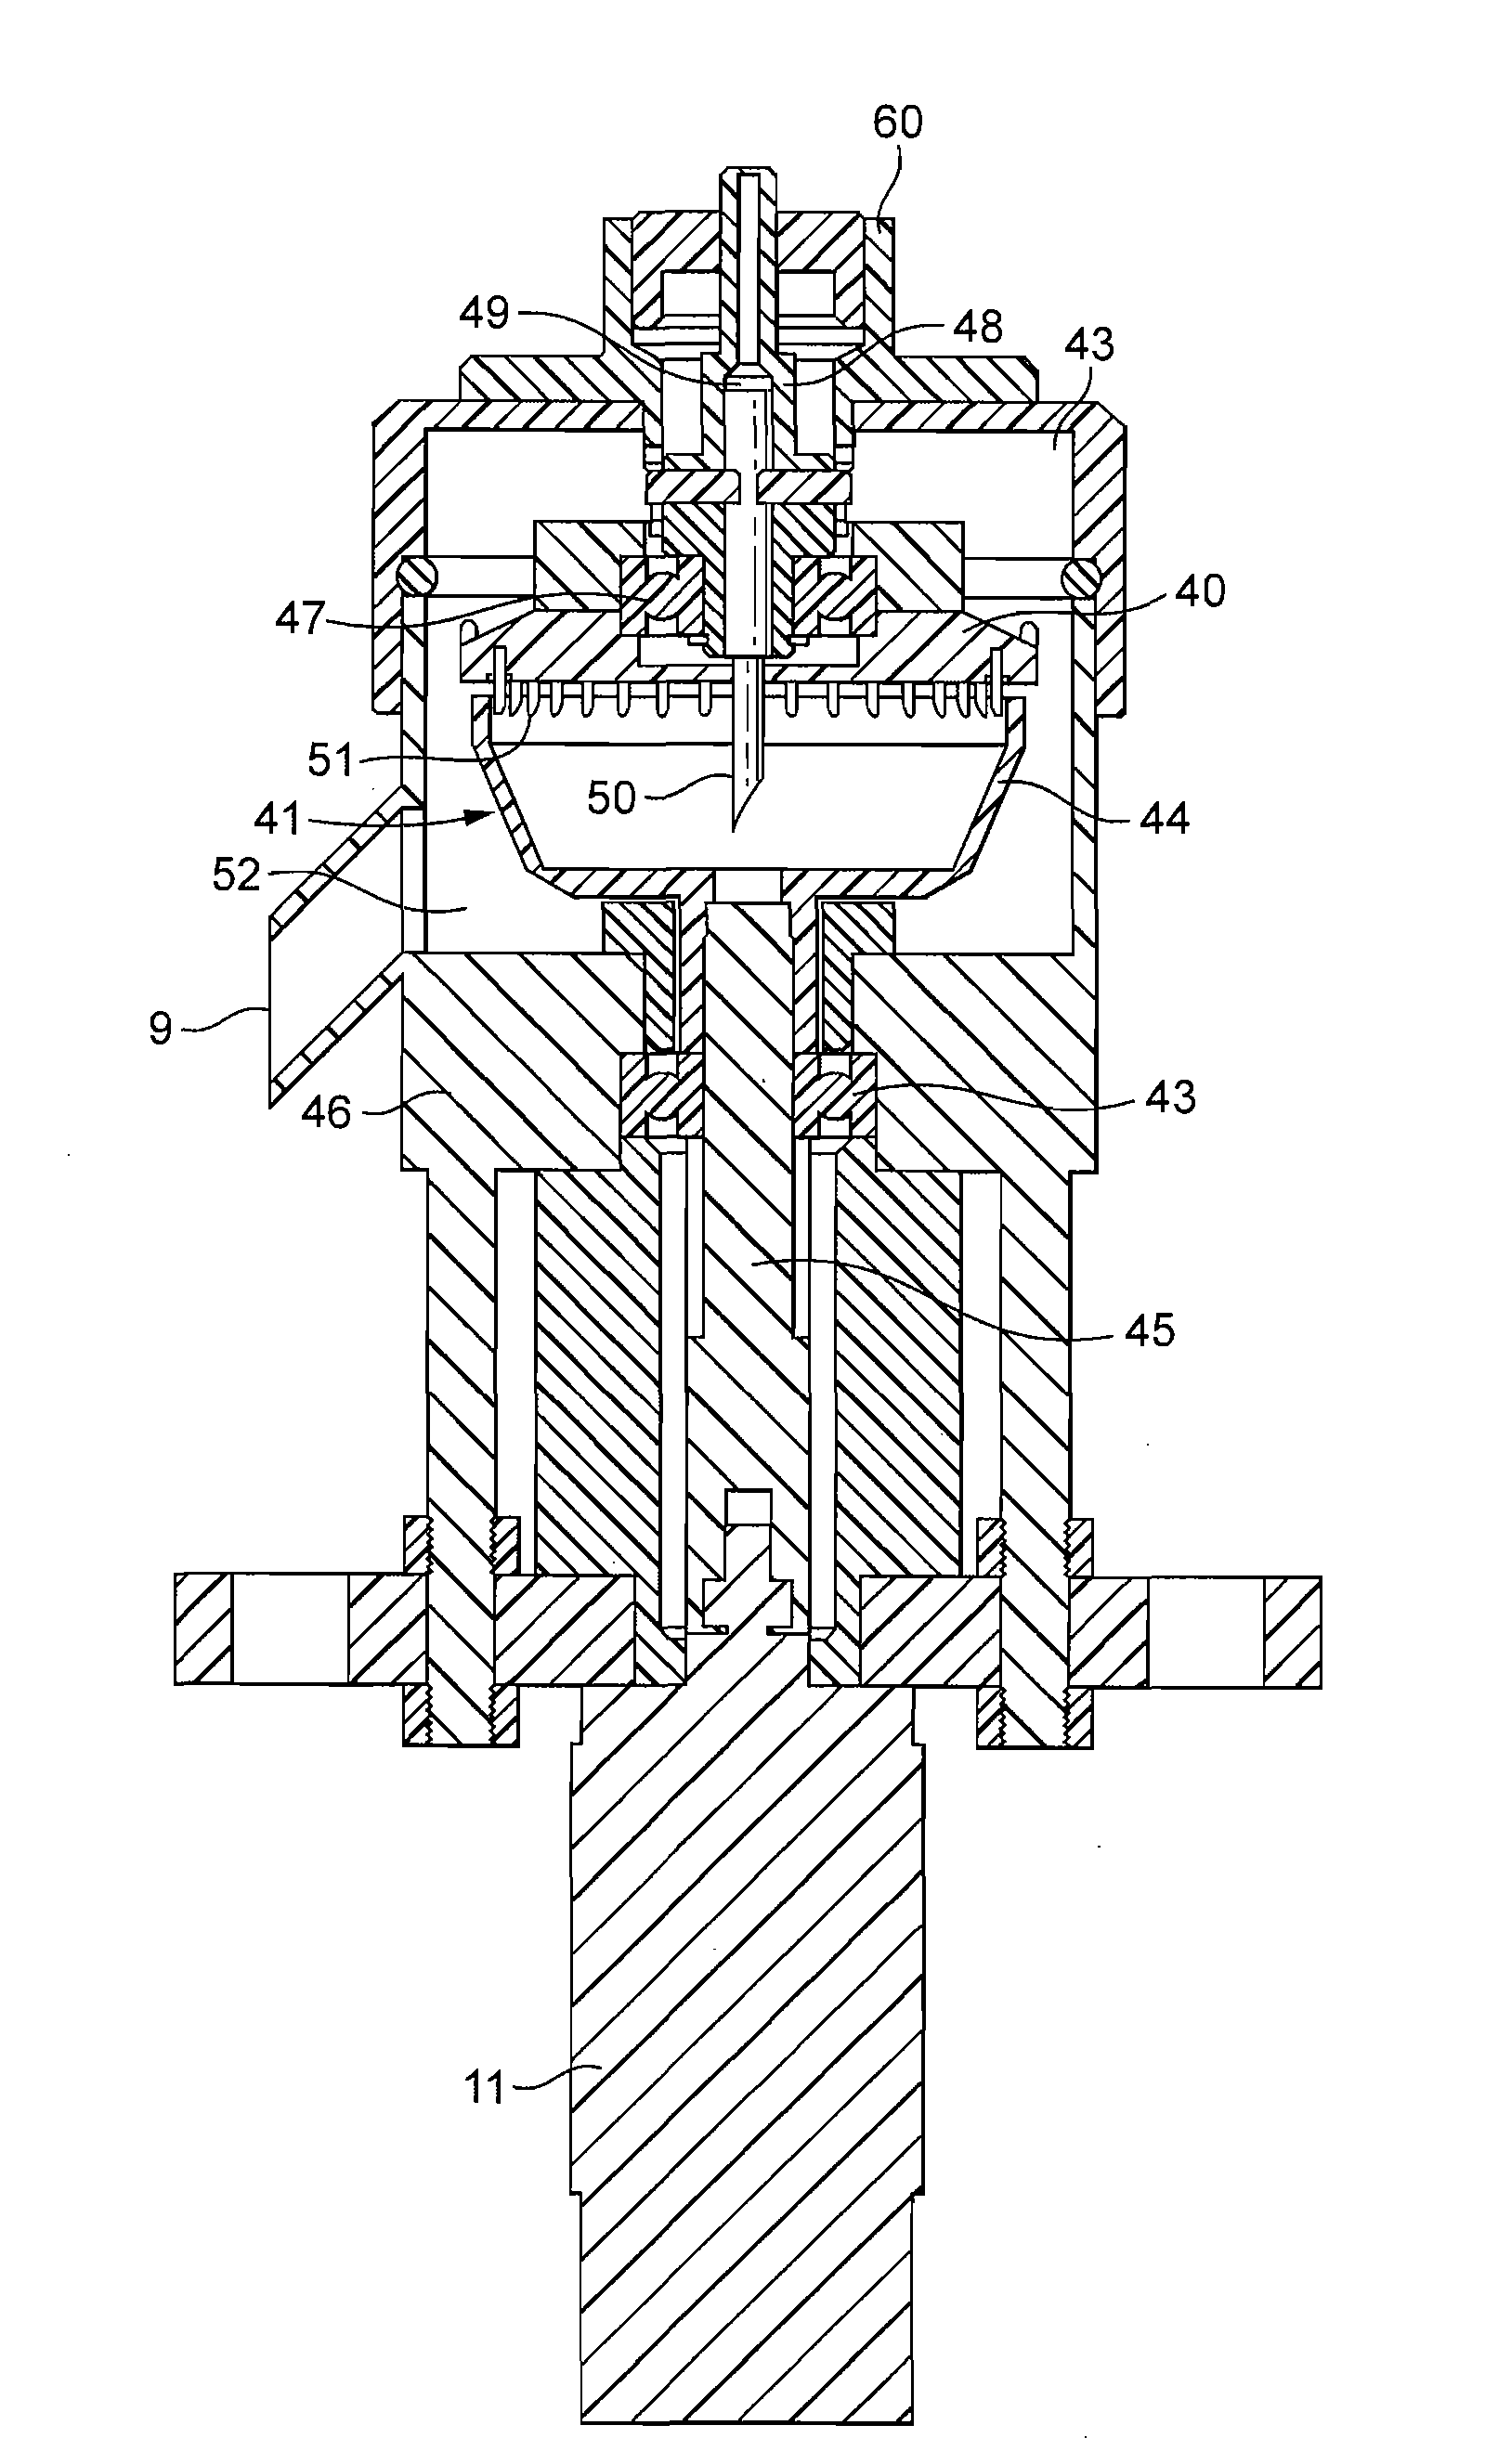 Method for preparing a beverage or food liquid and system using brewing centrifugal force